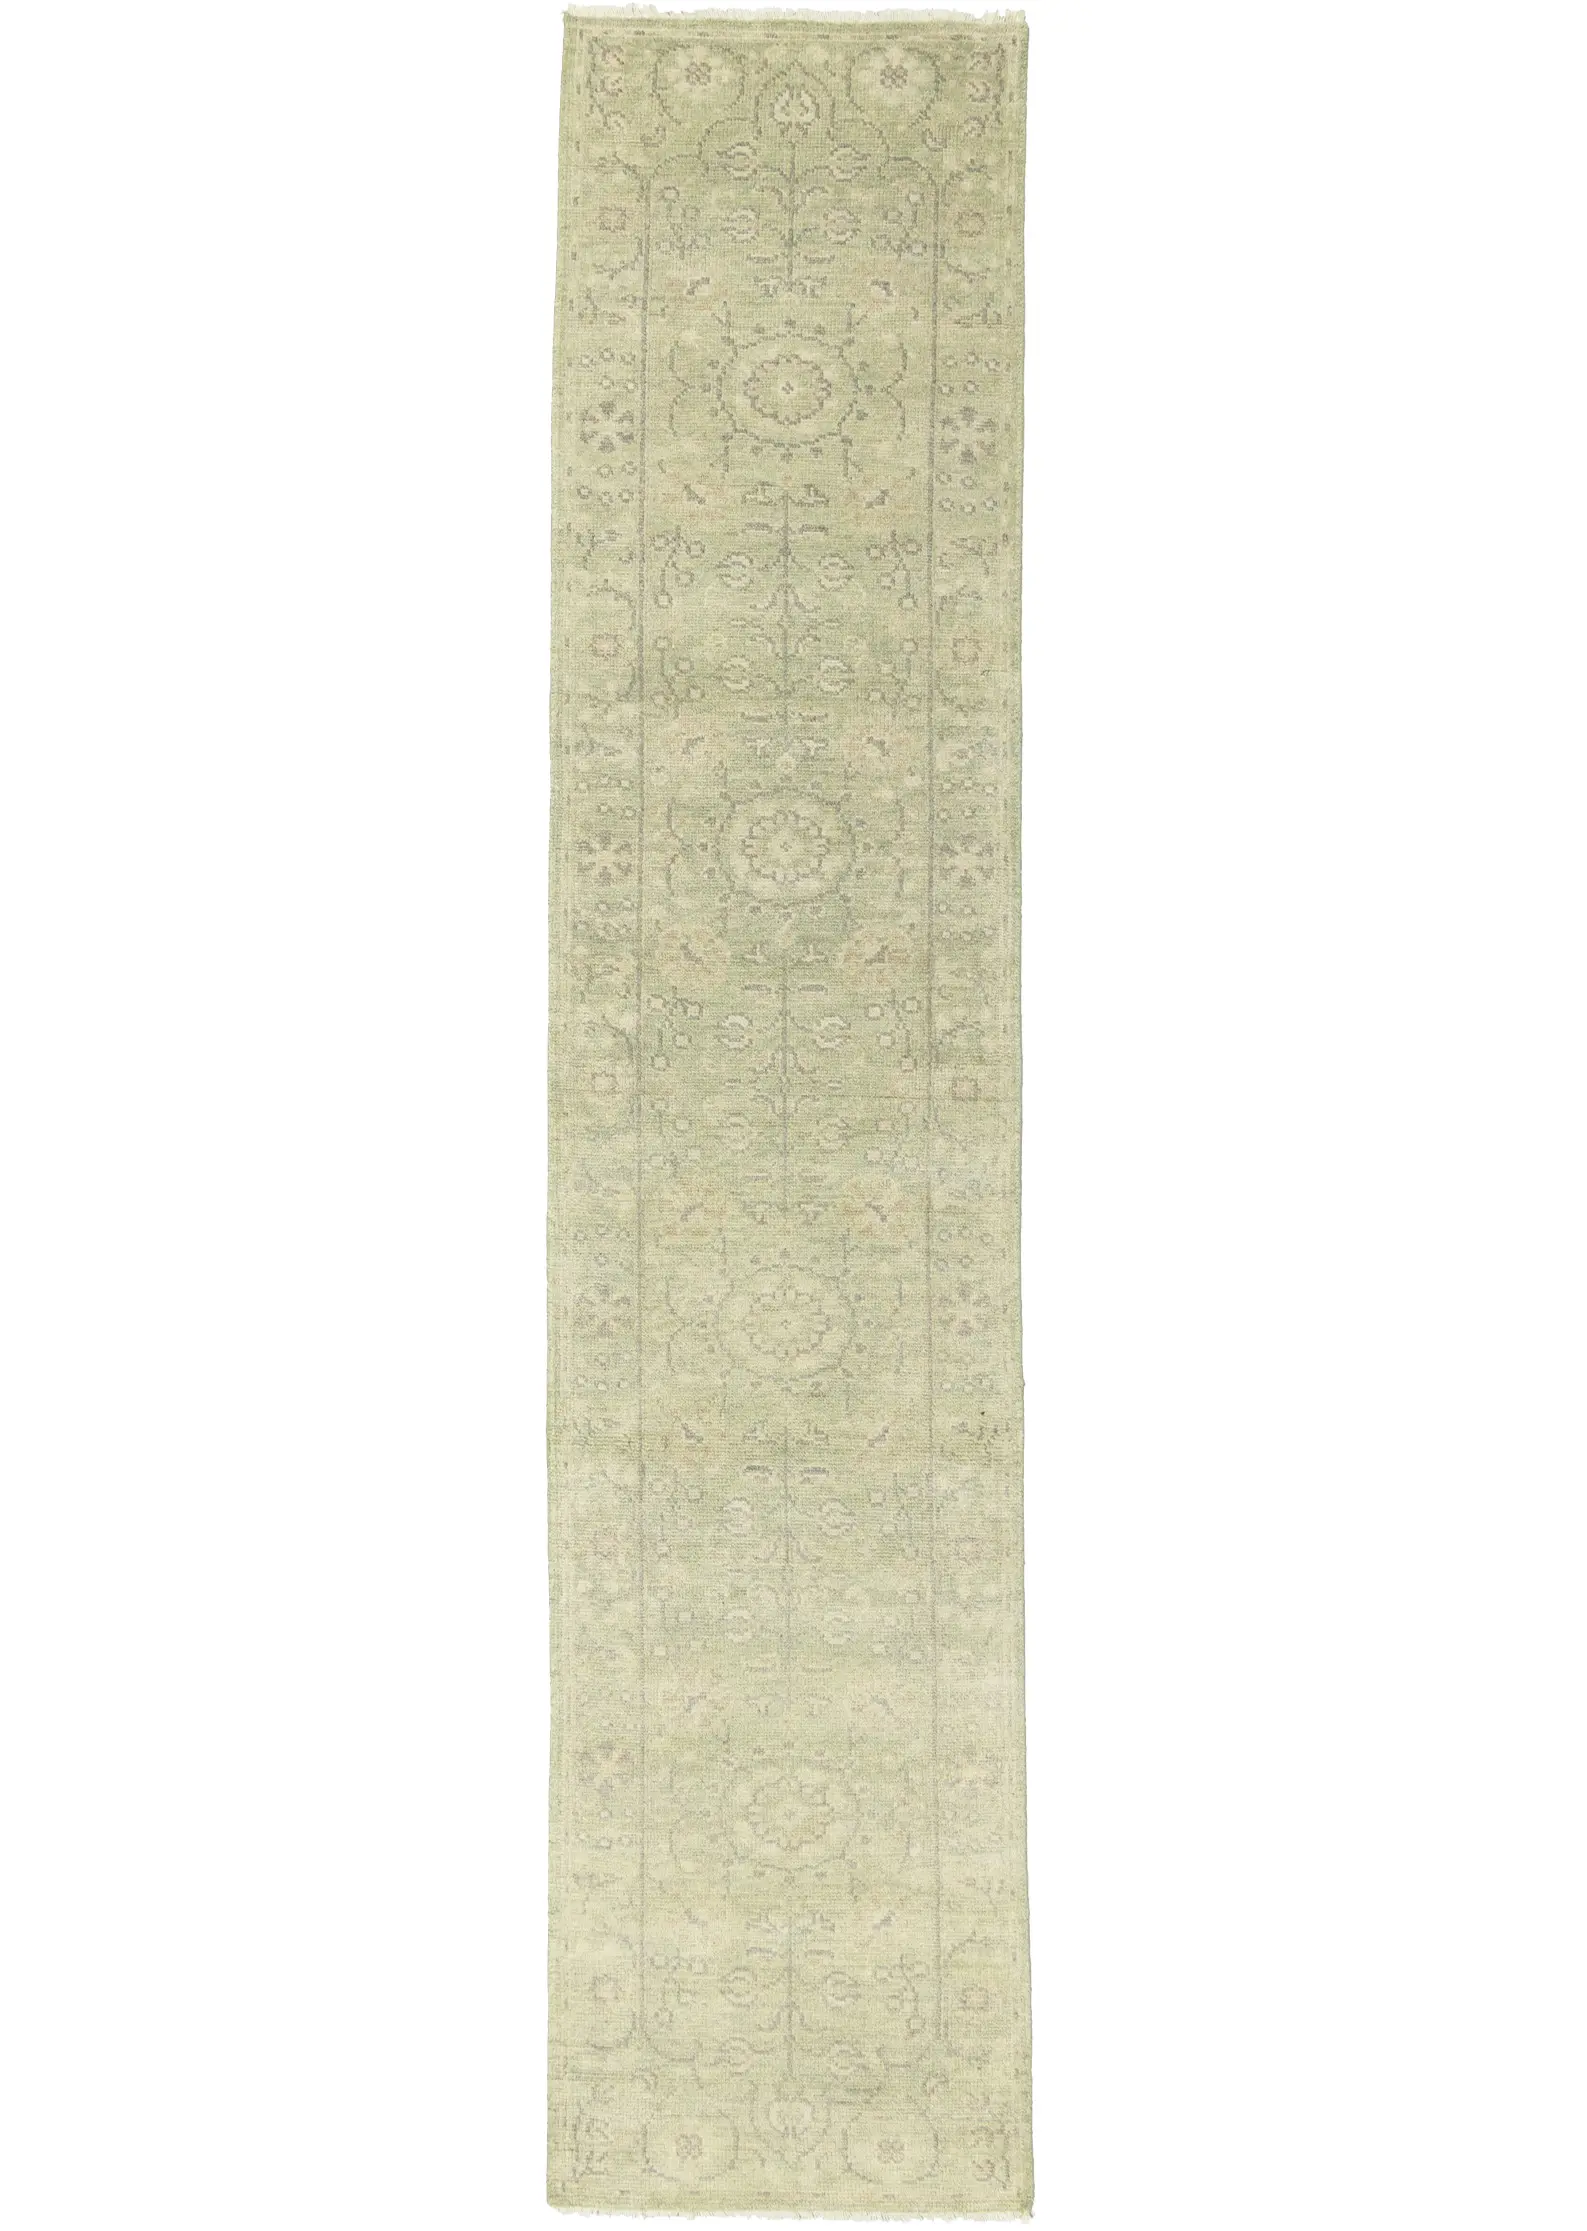 Muted Green Floral 2'7X11'9 Transitional Oriental Runner Rug